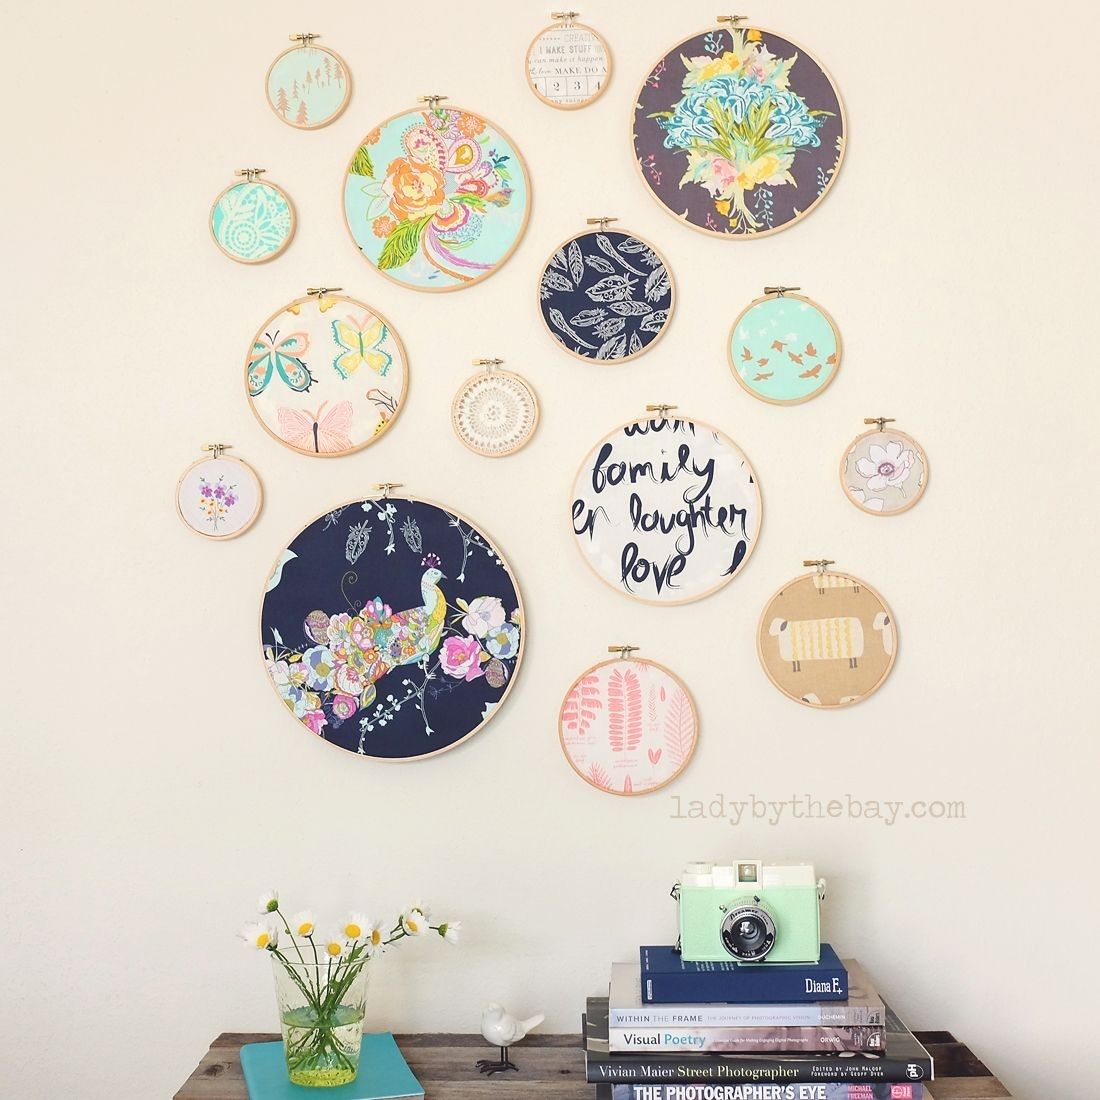 Diy Embroidery Hoop Wall Art | Diy Embroidery, Embroidery And Walls Intended For Most Recent Embroidery Hoop Fabric Wall Art (View 2 of 15)